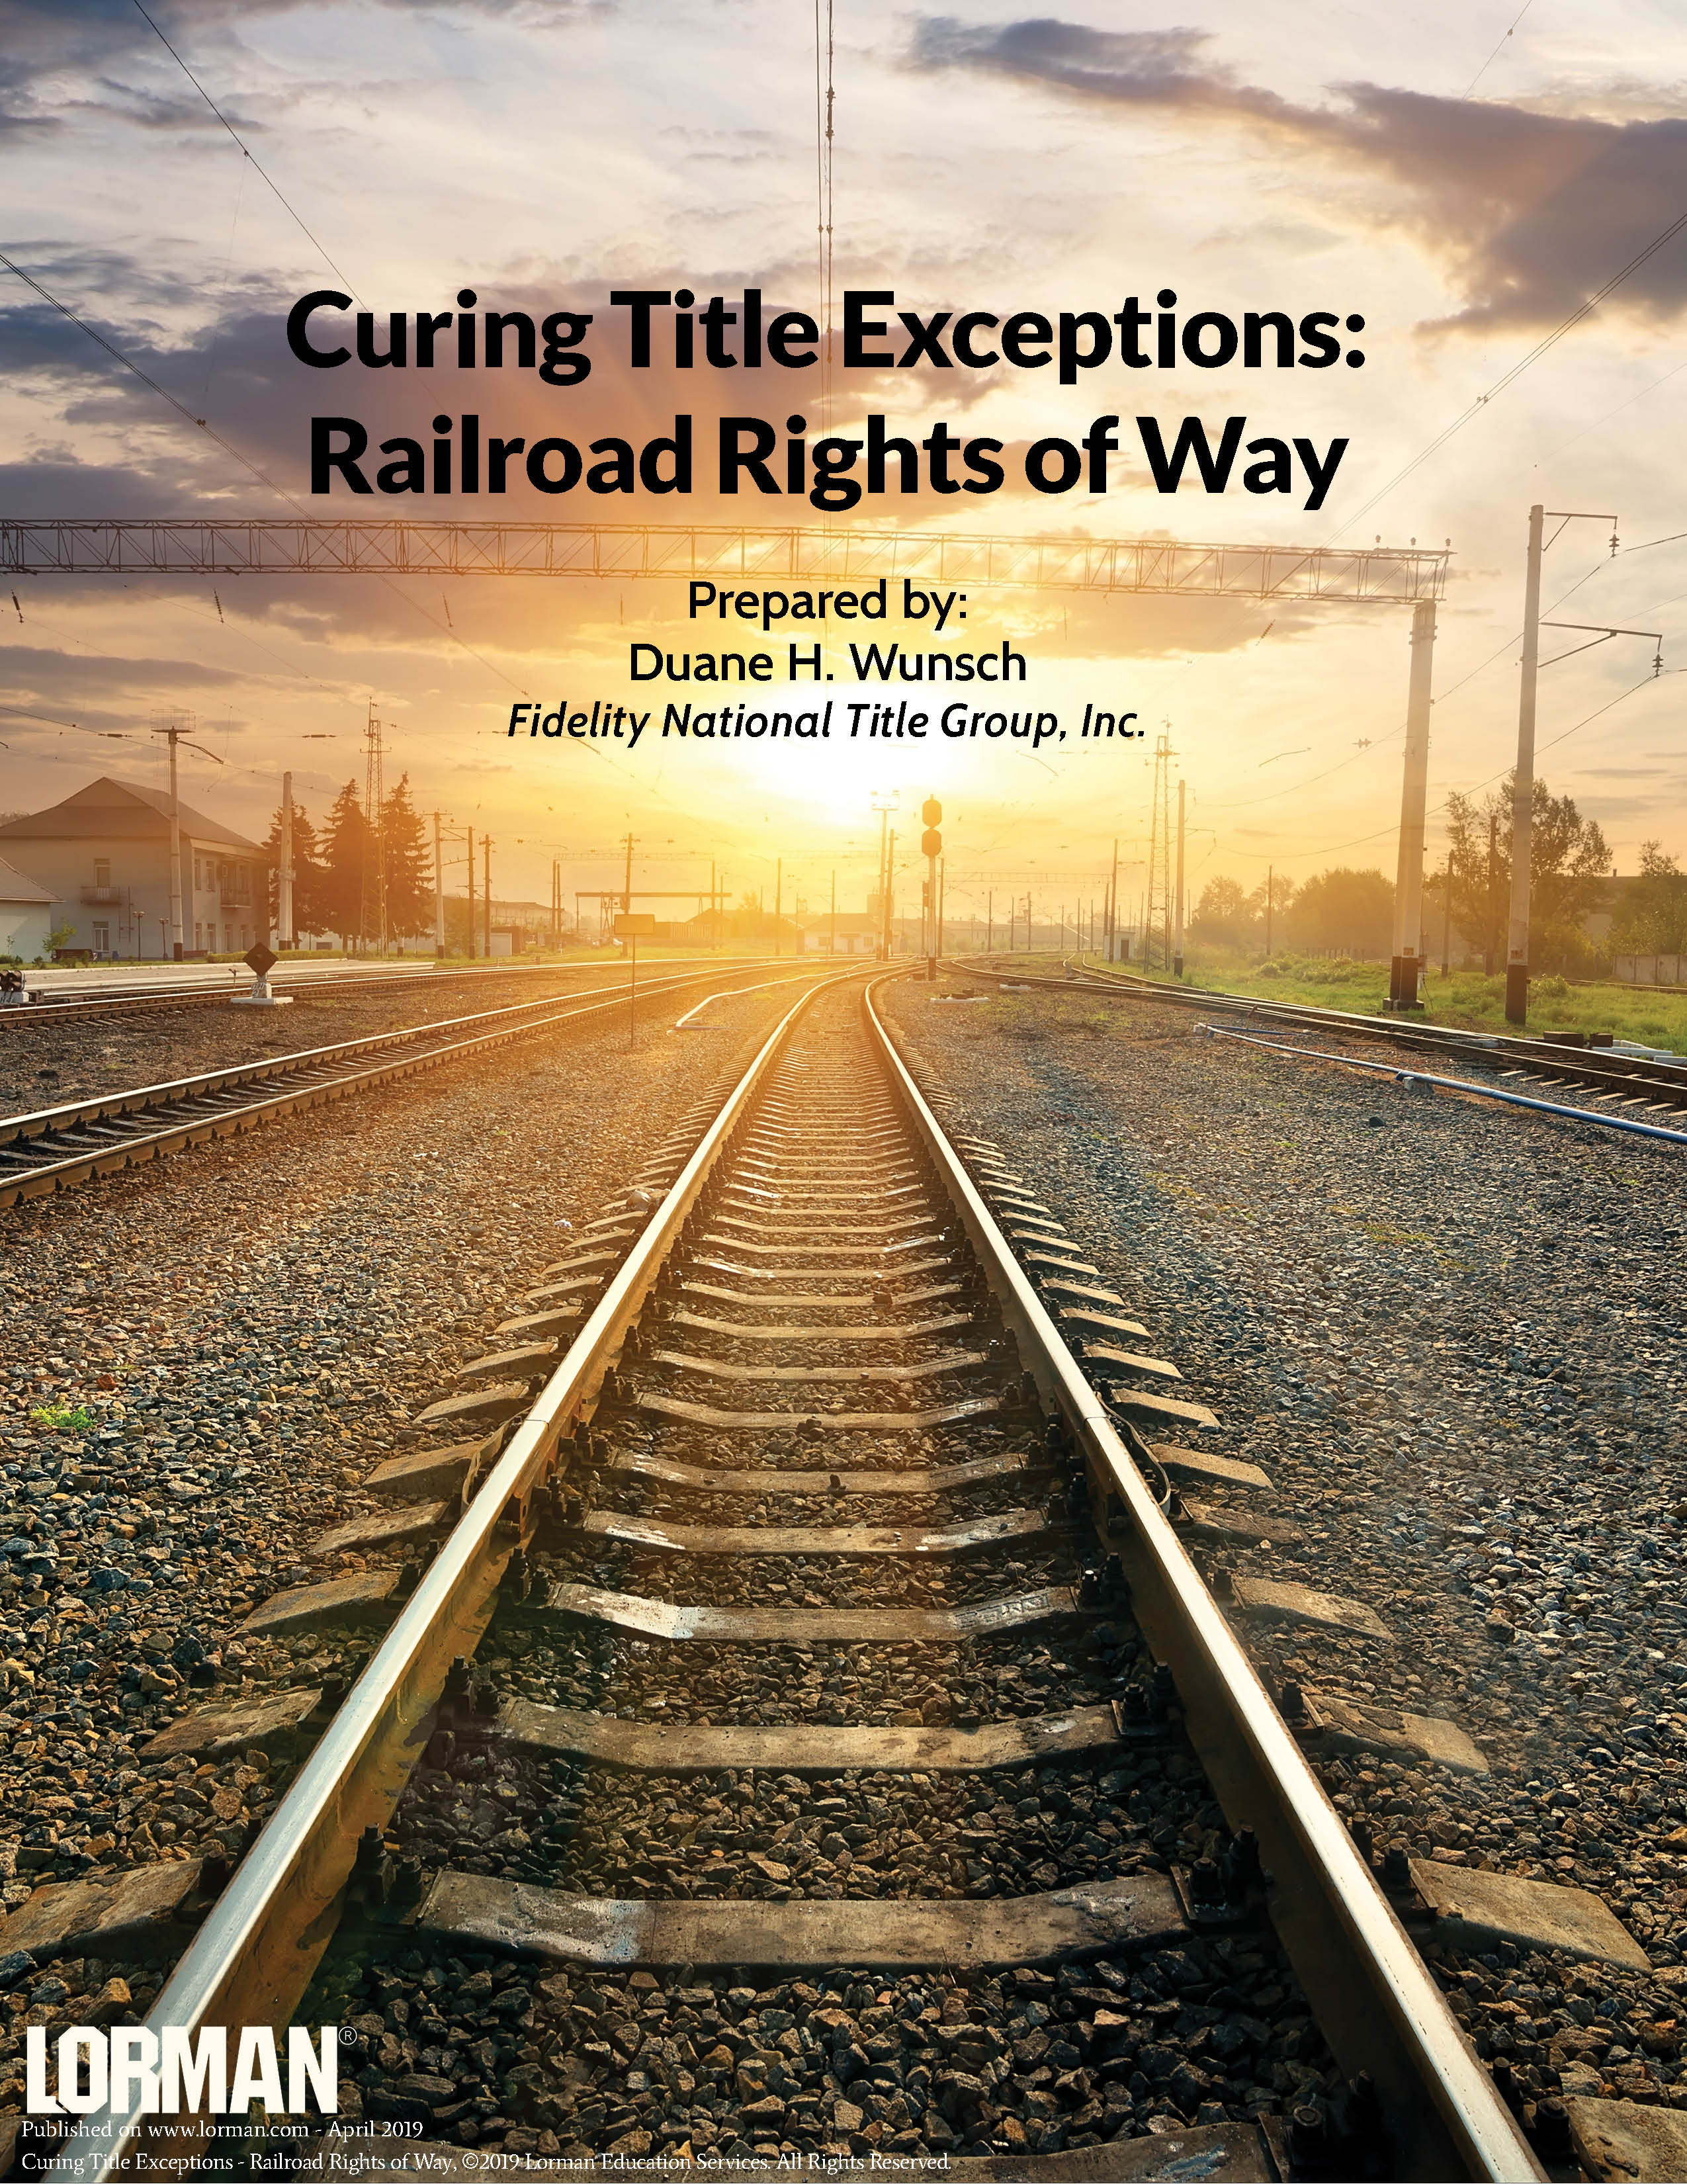 Curing Title Exceptions - Railroad Rights of Way